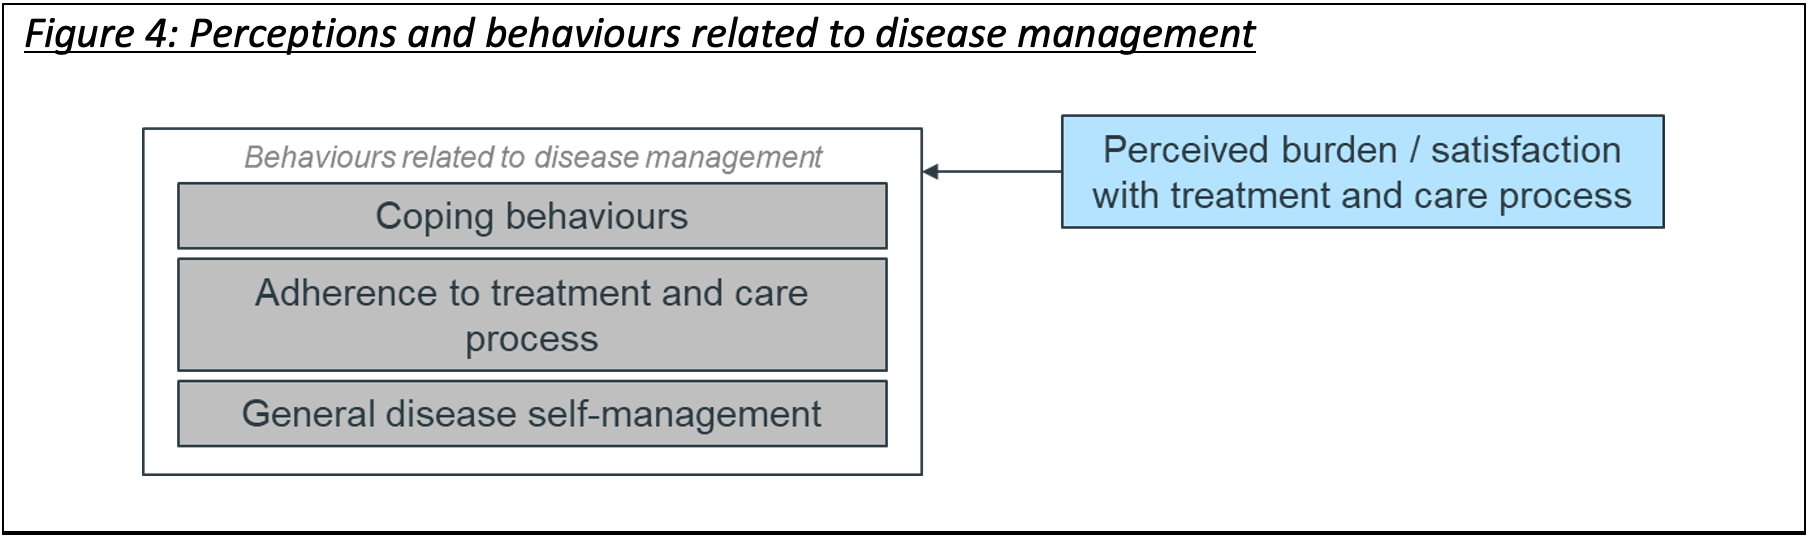 Figure 4: Perceptions and behaviors related to disease management